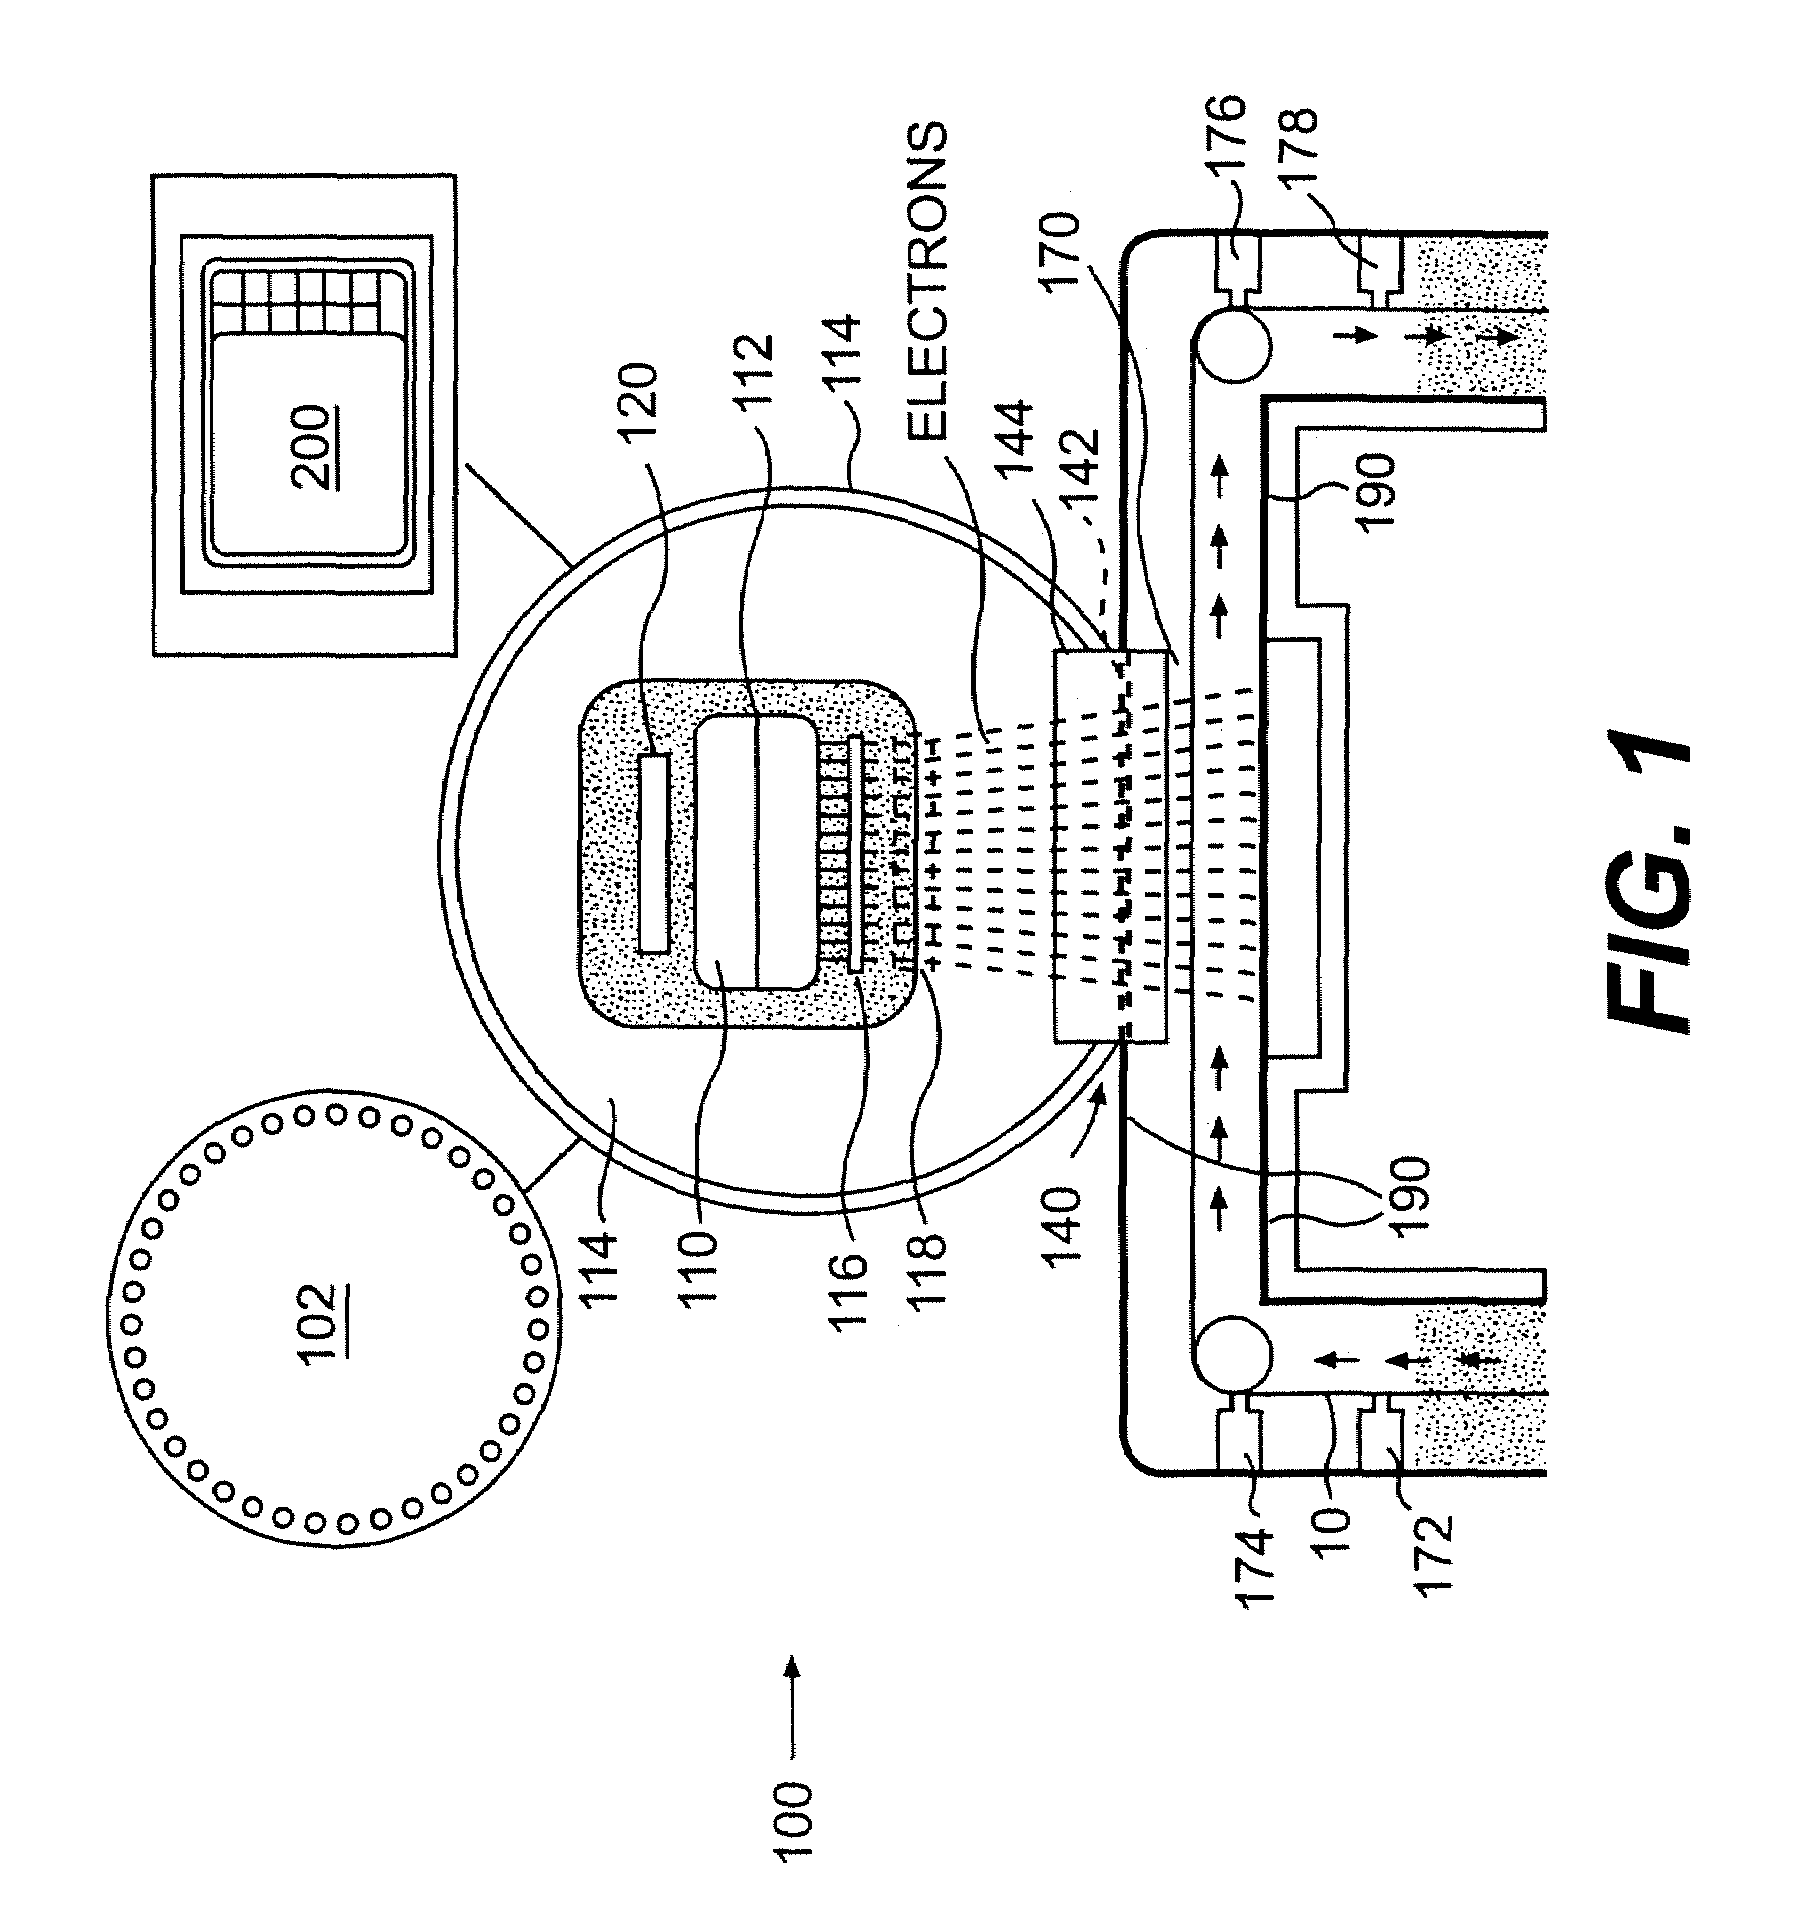 Particle beam processing apparatus and materials treatable using the apparatus